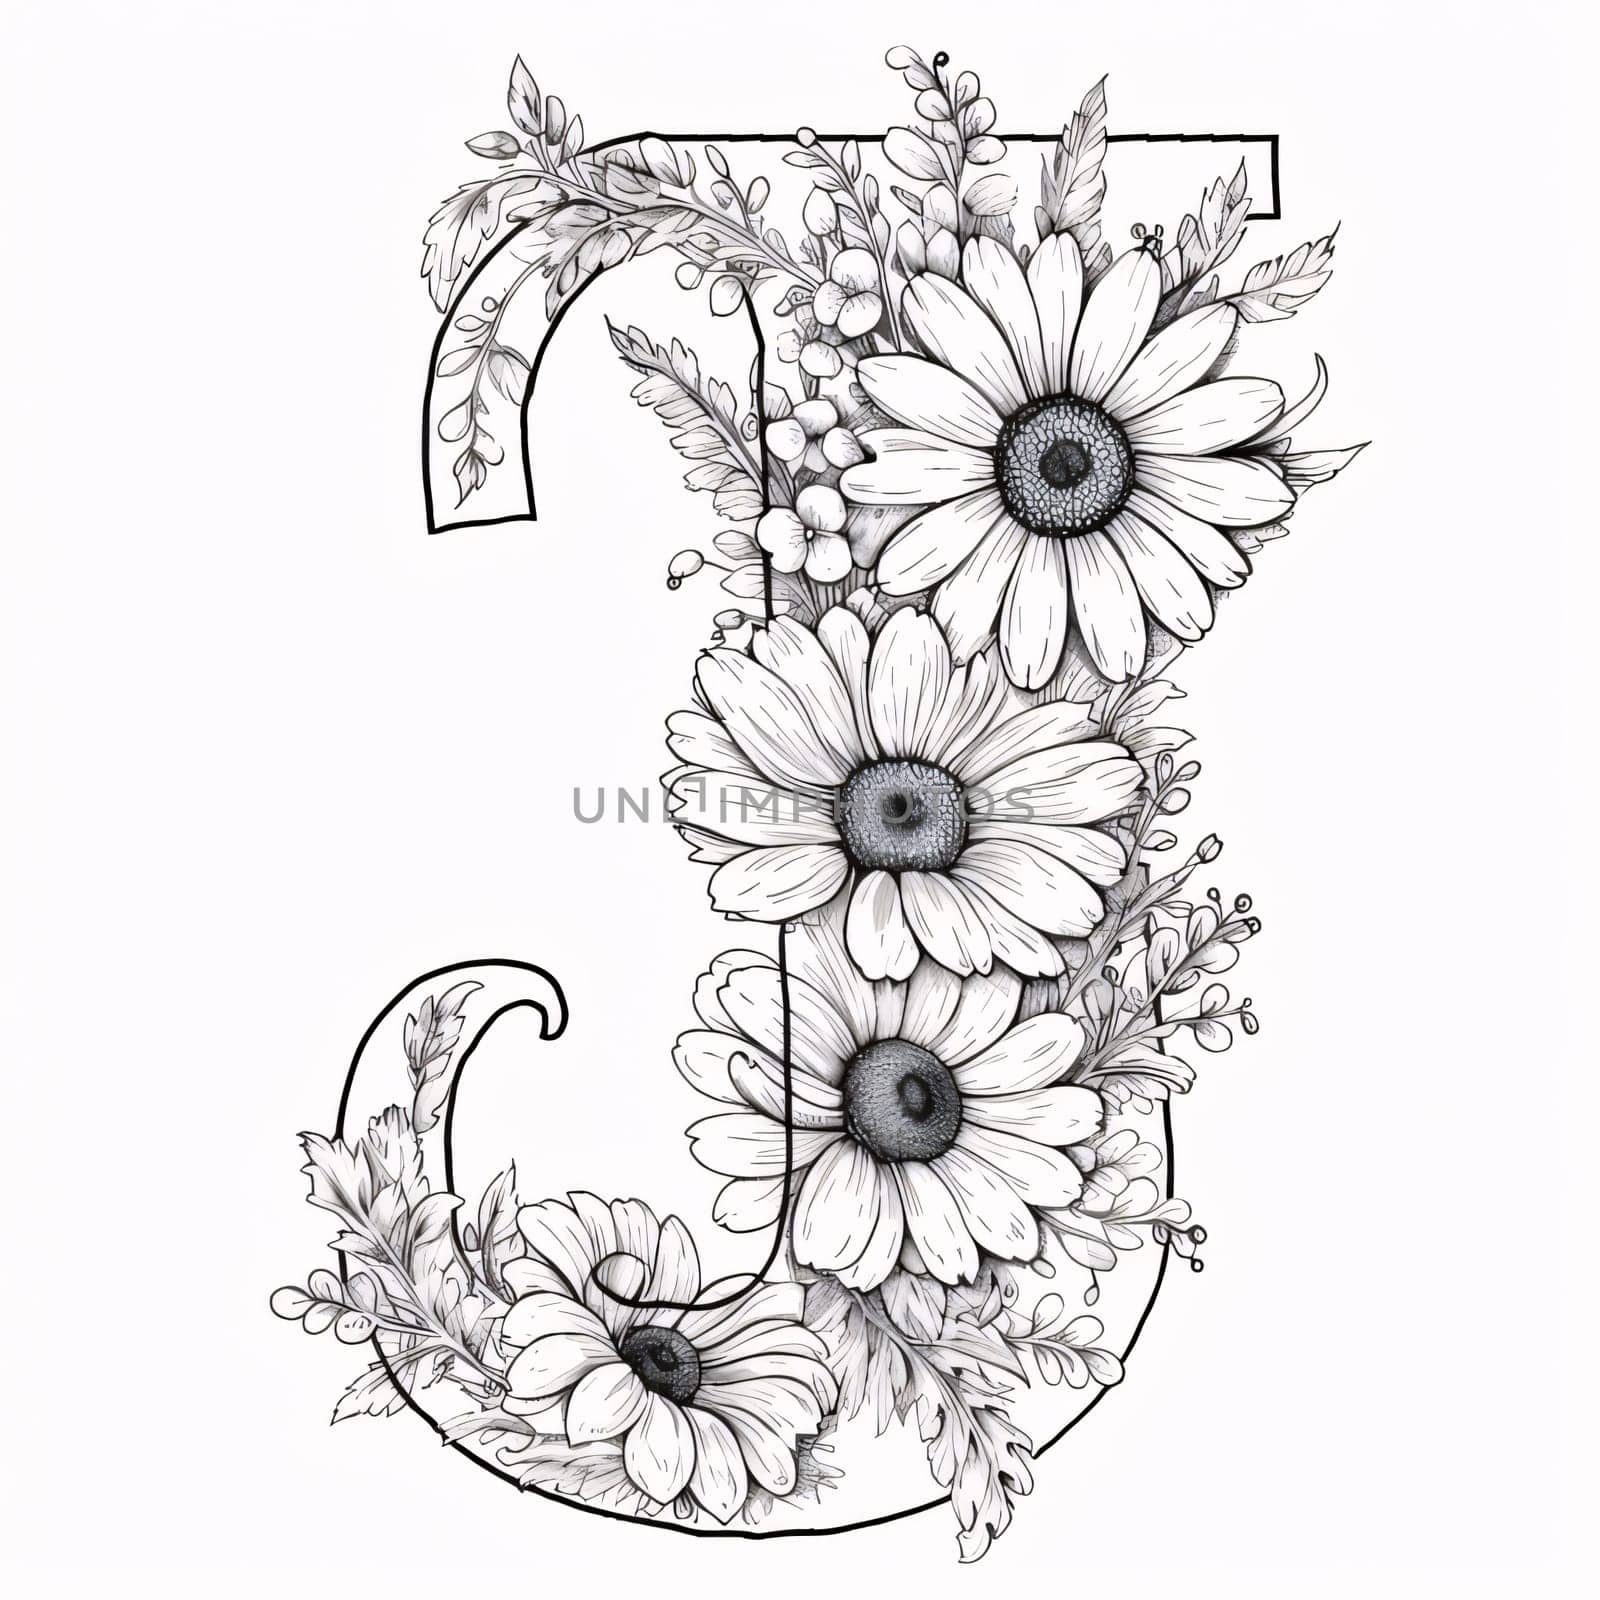 Graphic alphabet letters: Black and white floral alphabet, letter J. Hand drawn flowers and leaves.